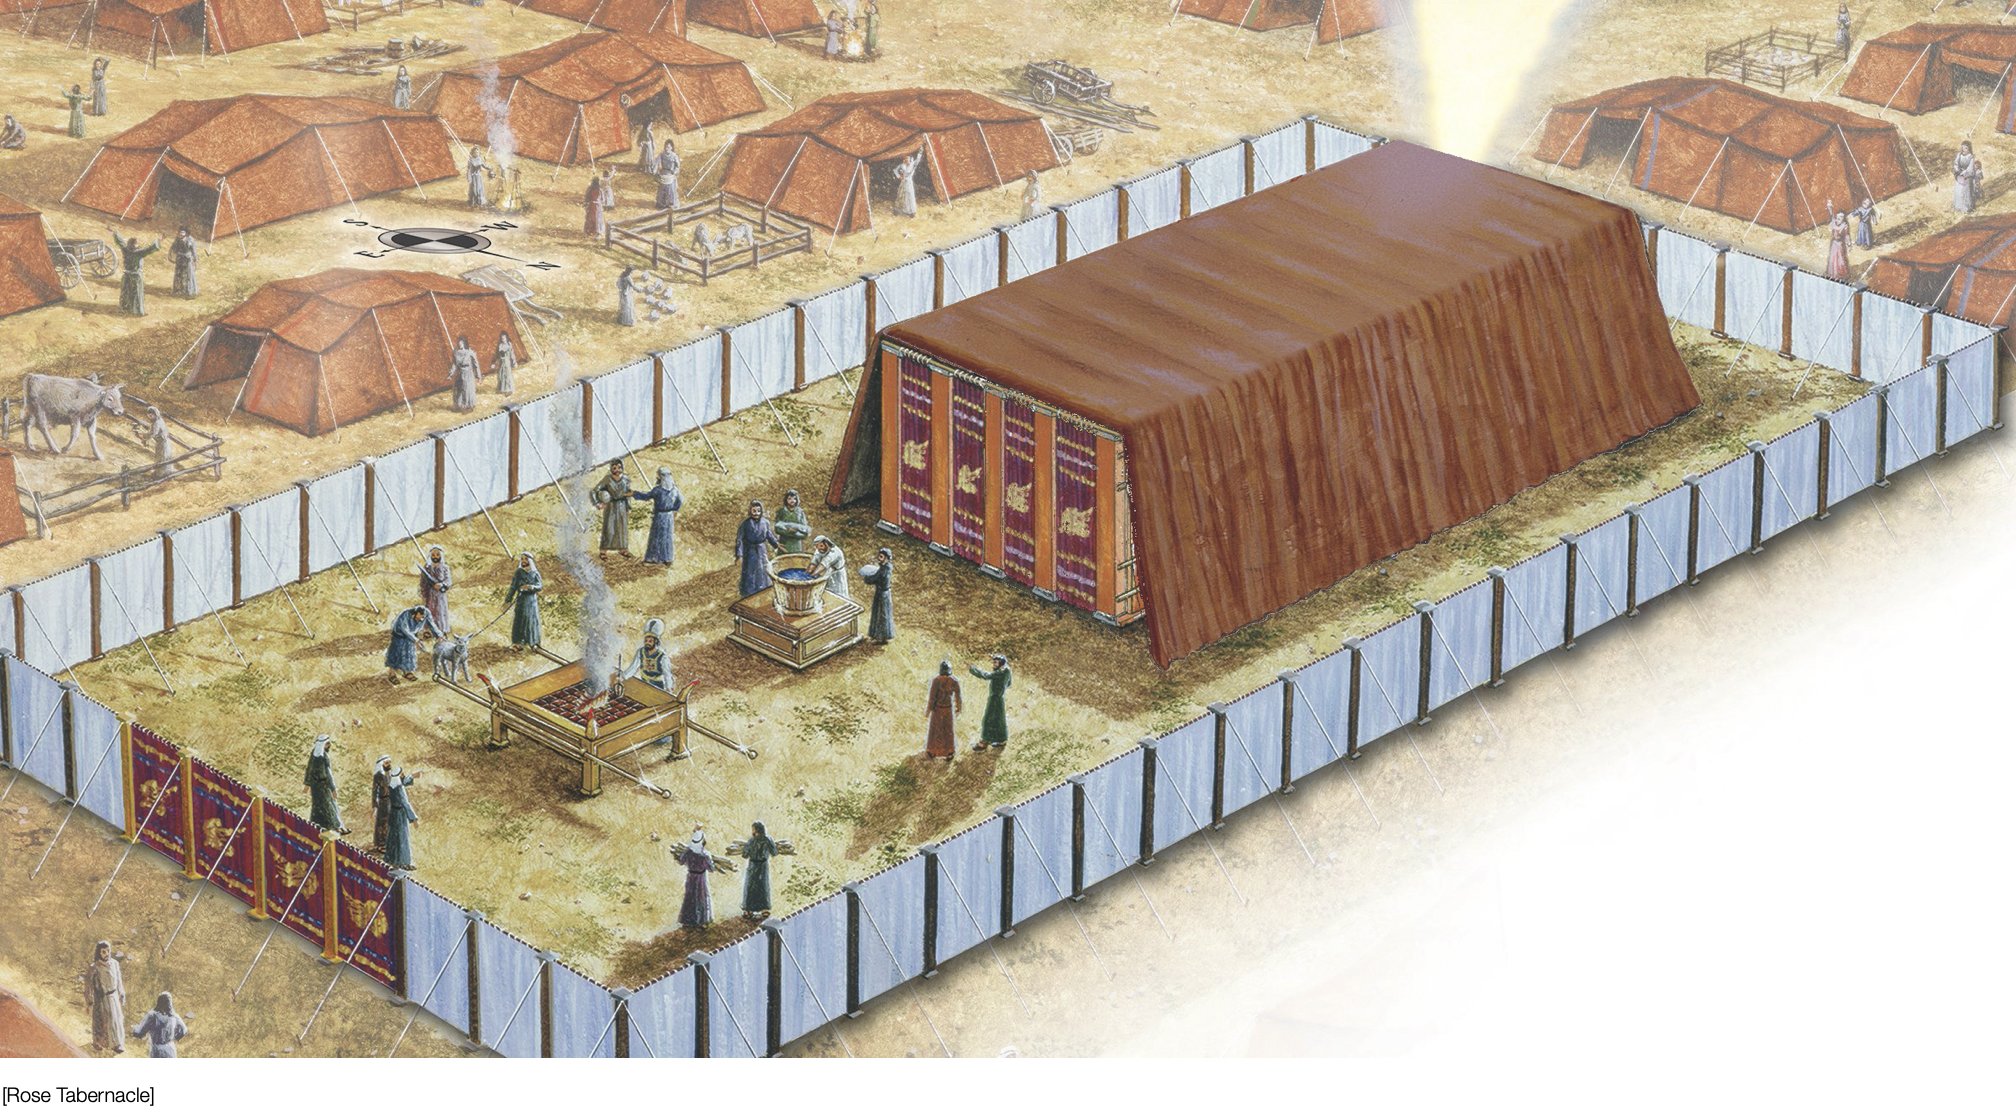 The Tabernacle of Moses.